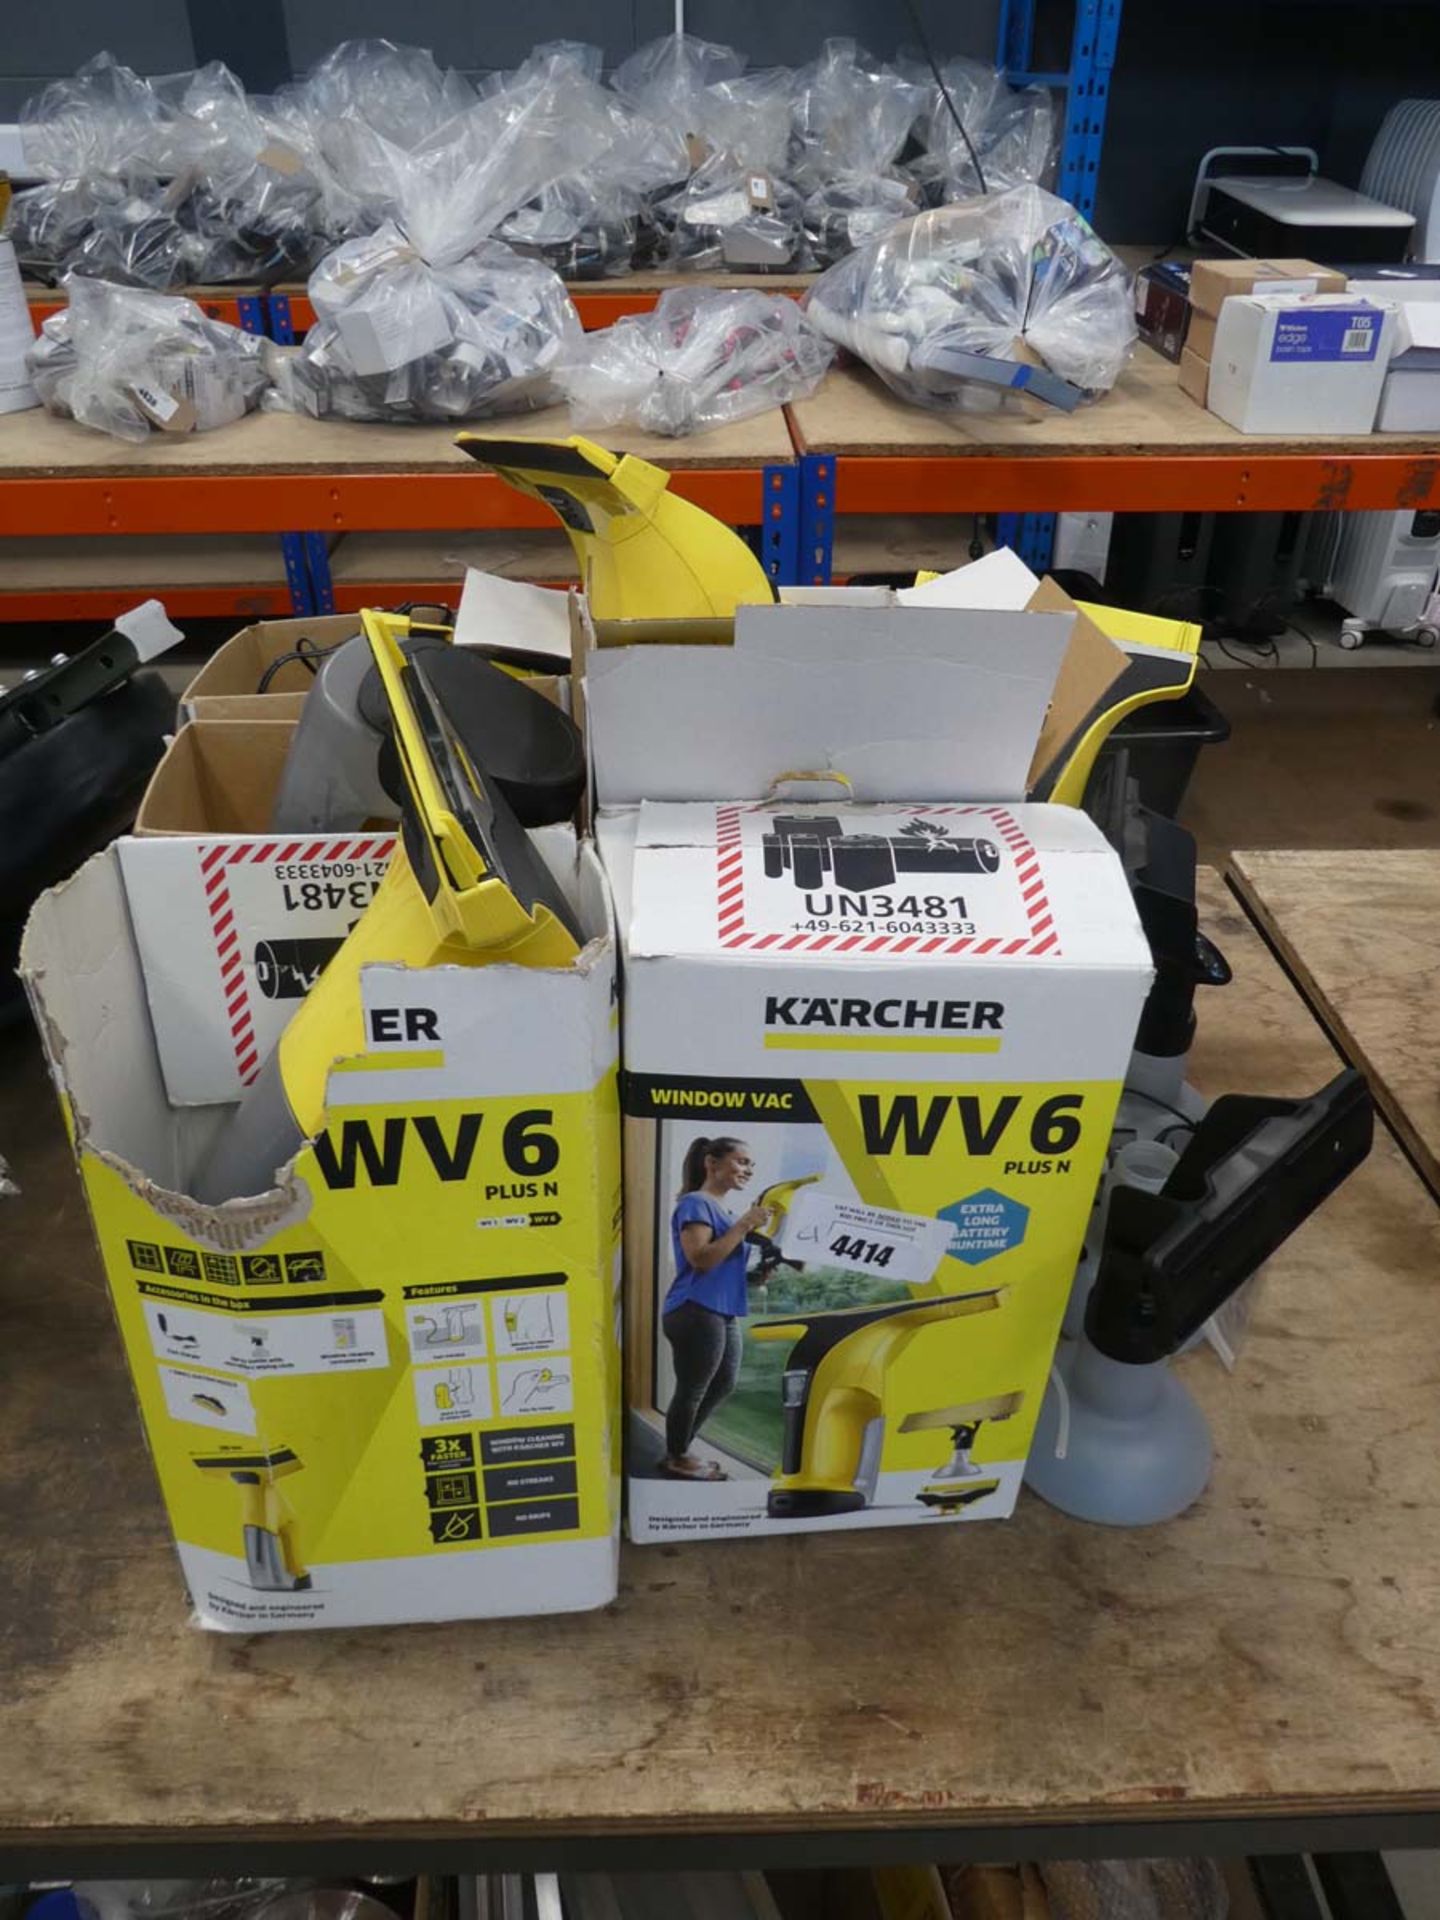 6 boxed and 1 unboxed Karcher window vac